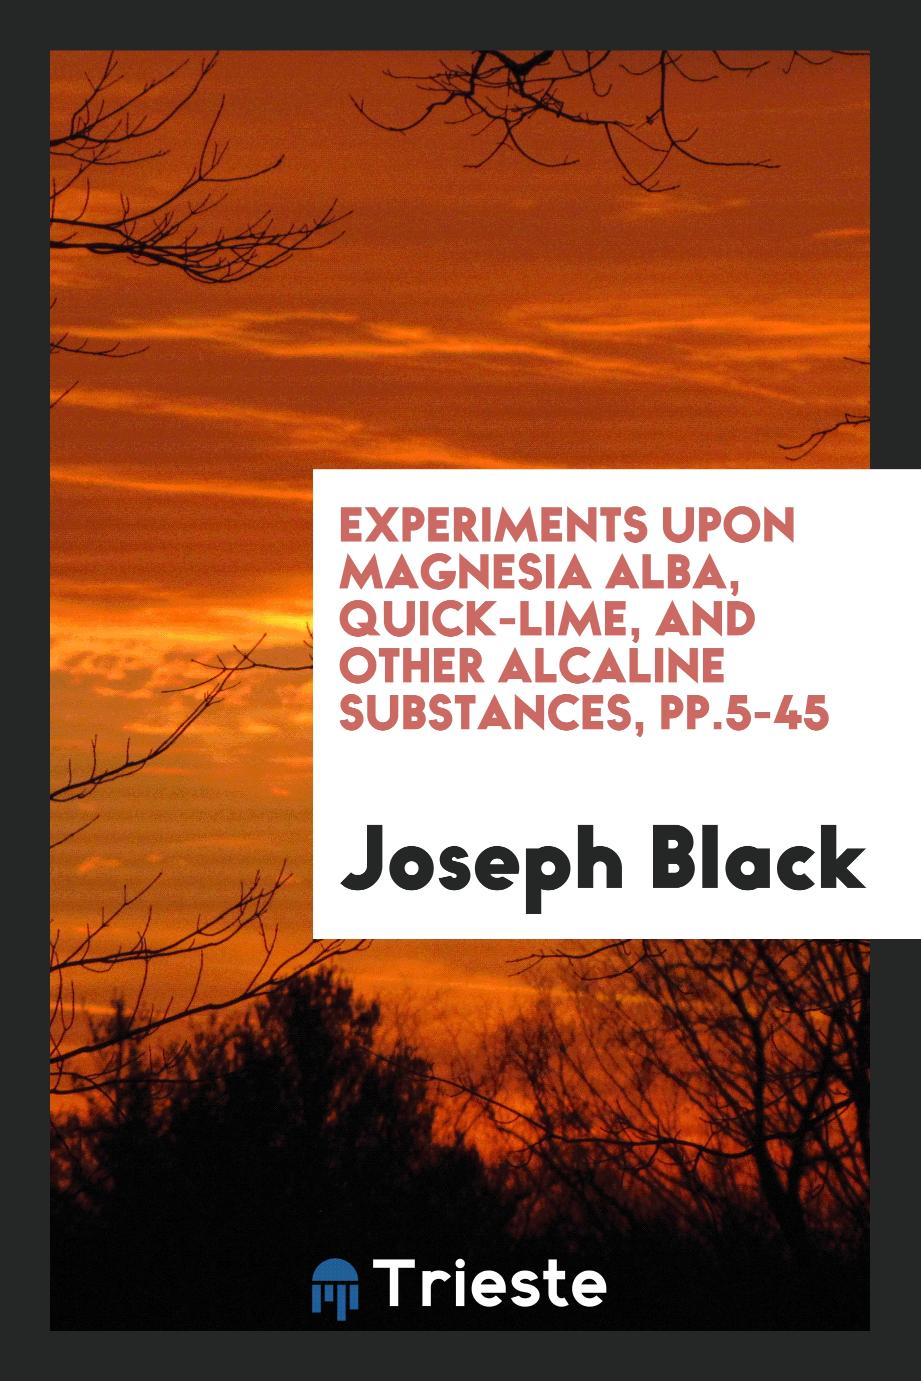 Experiments Upon Magnesia Alba, Quick-lime, and Other Alcaline Substances, pp.5-45